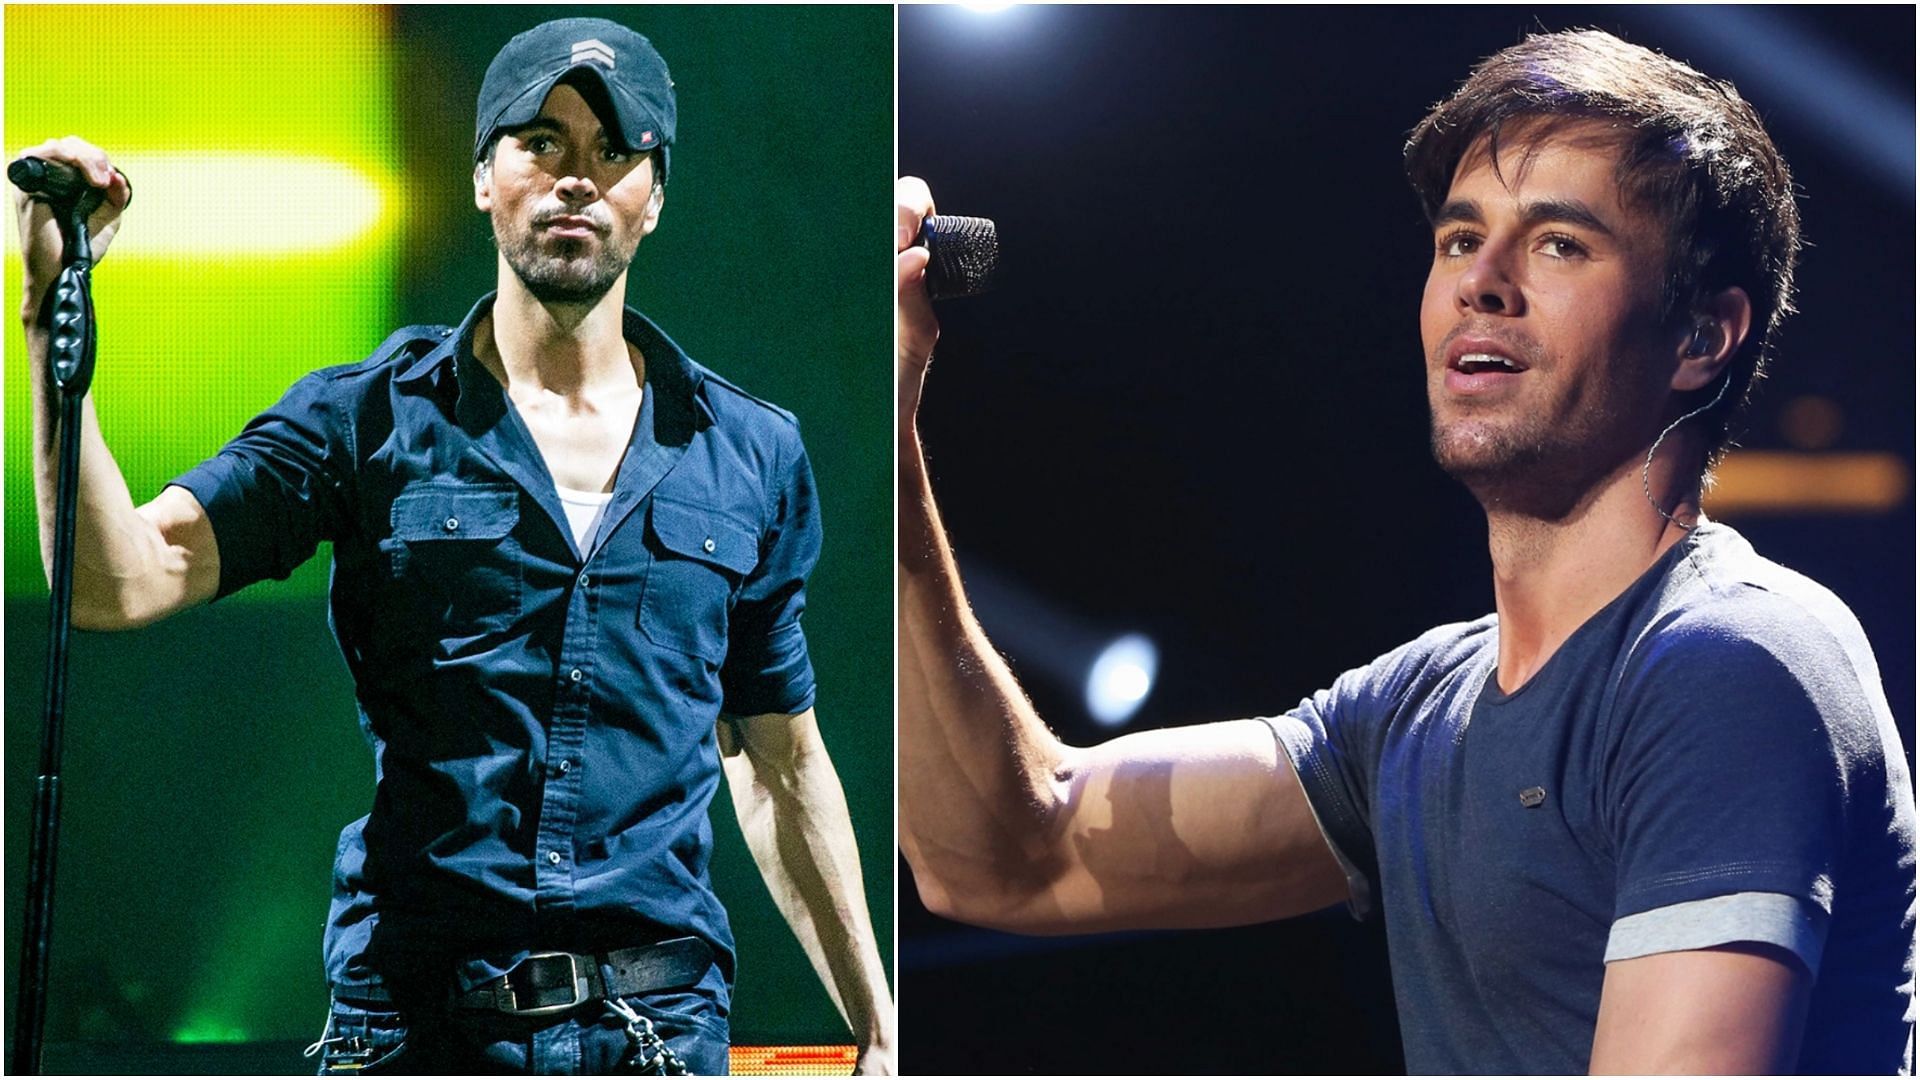 Enrique has announced dates for his upcoming concerts in Las Vegas (Images via Christopher Polk and Roberto Finizio/Getty Images)